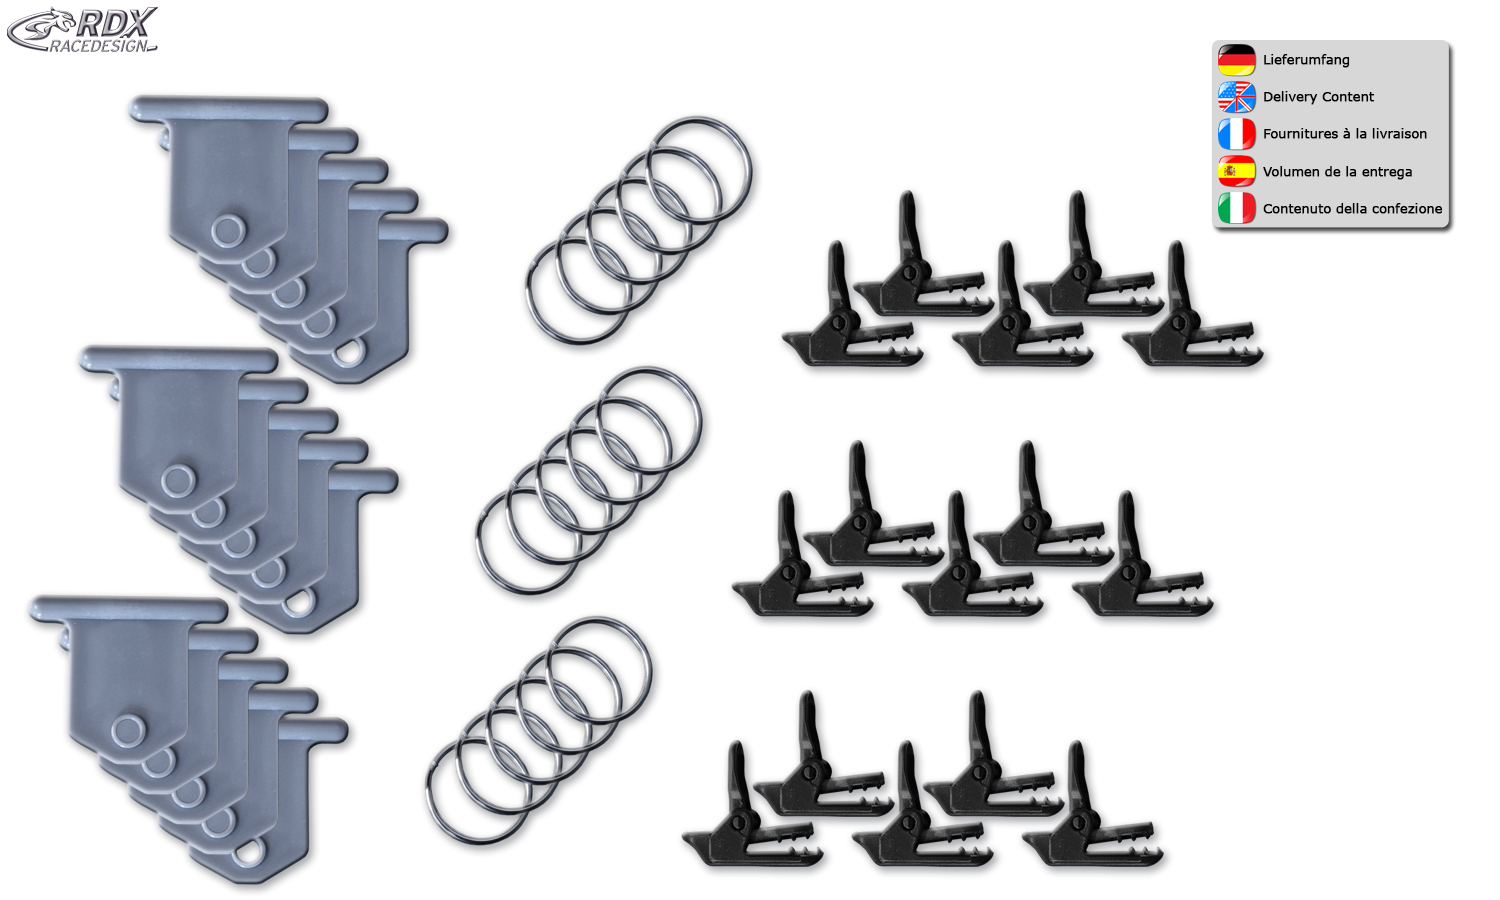 RDX clip fastening set for Keder rails in camping awnings, e.g. for curtains (15x/45pcs.)